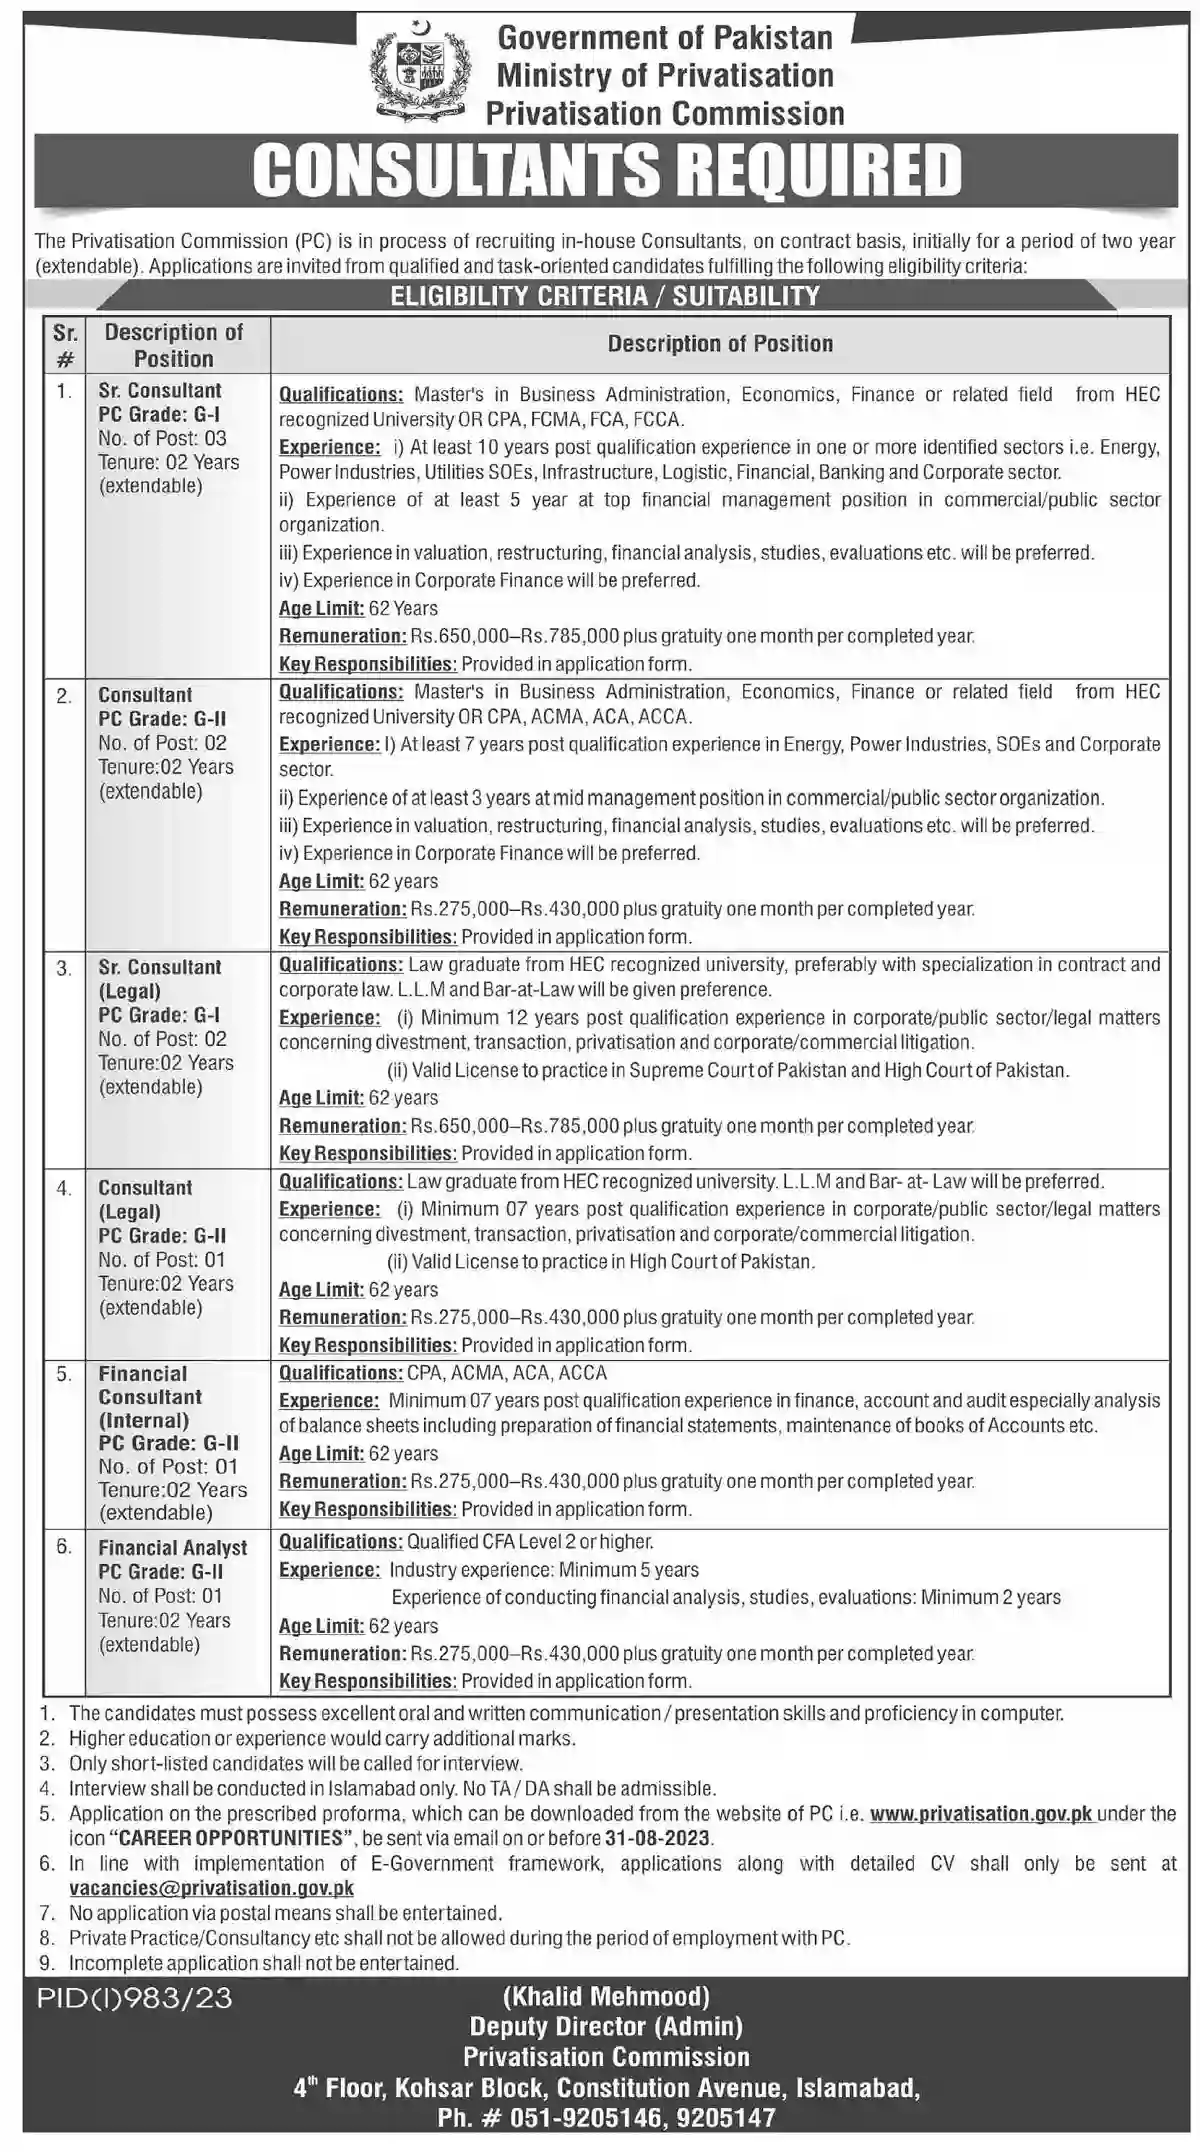 Ministry of Privatisation Jobs 2023 Privatisation Commission (PC) Consultants Required